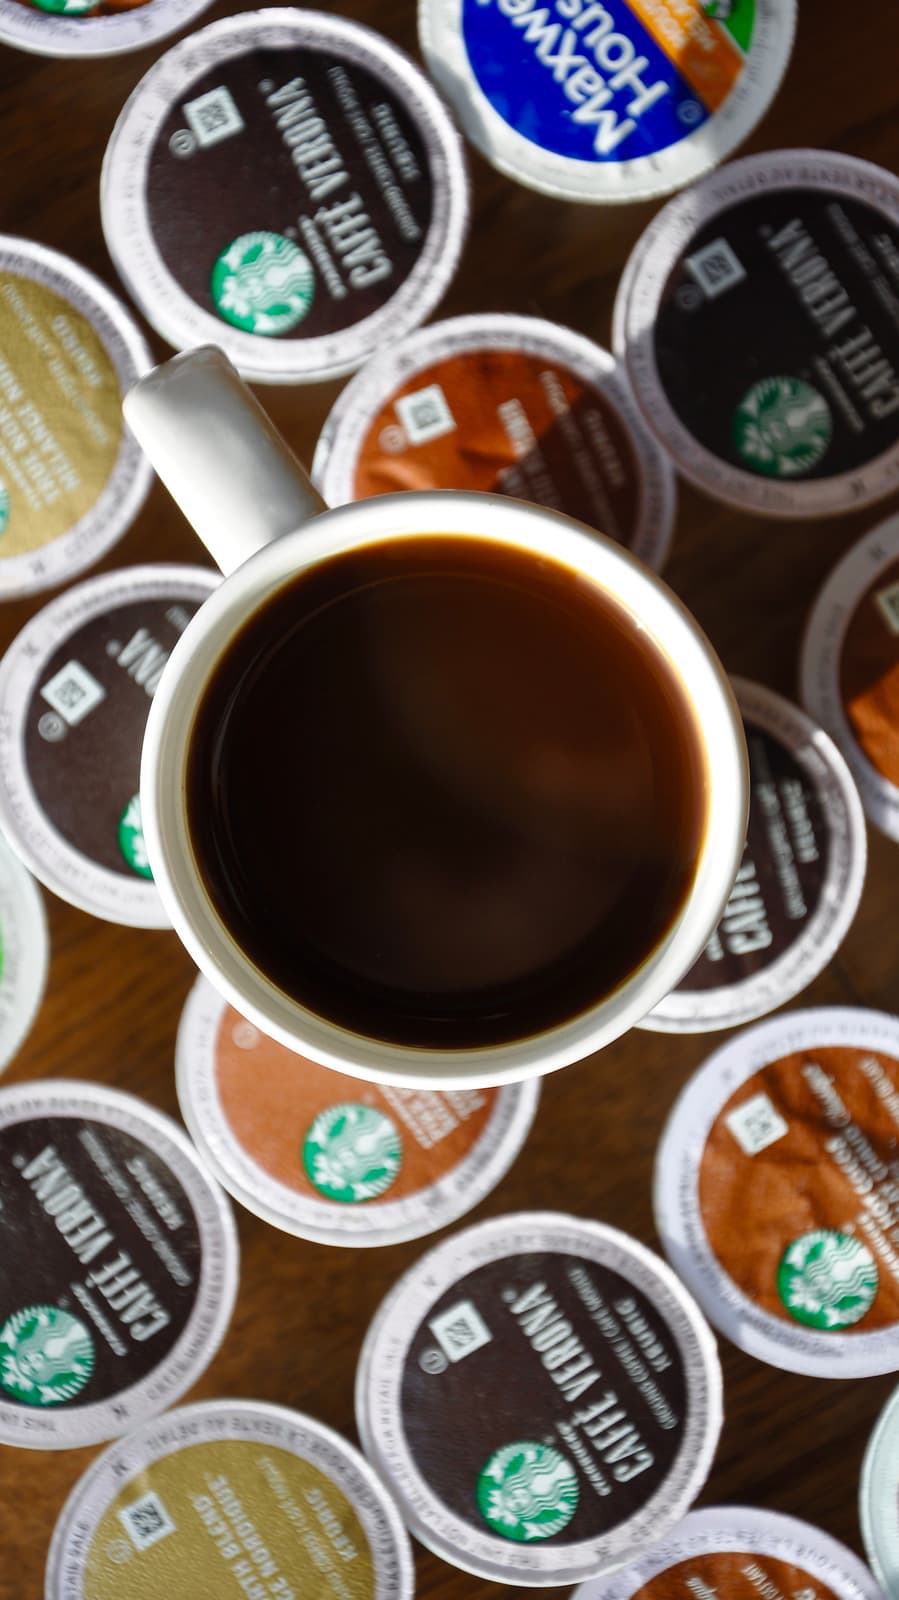 Cup of coffee on top of Keurig K-cup coffee pods